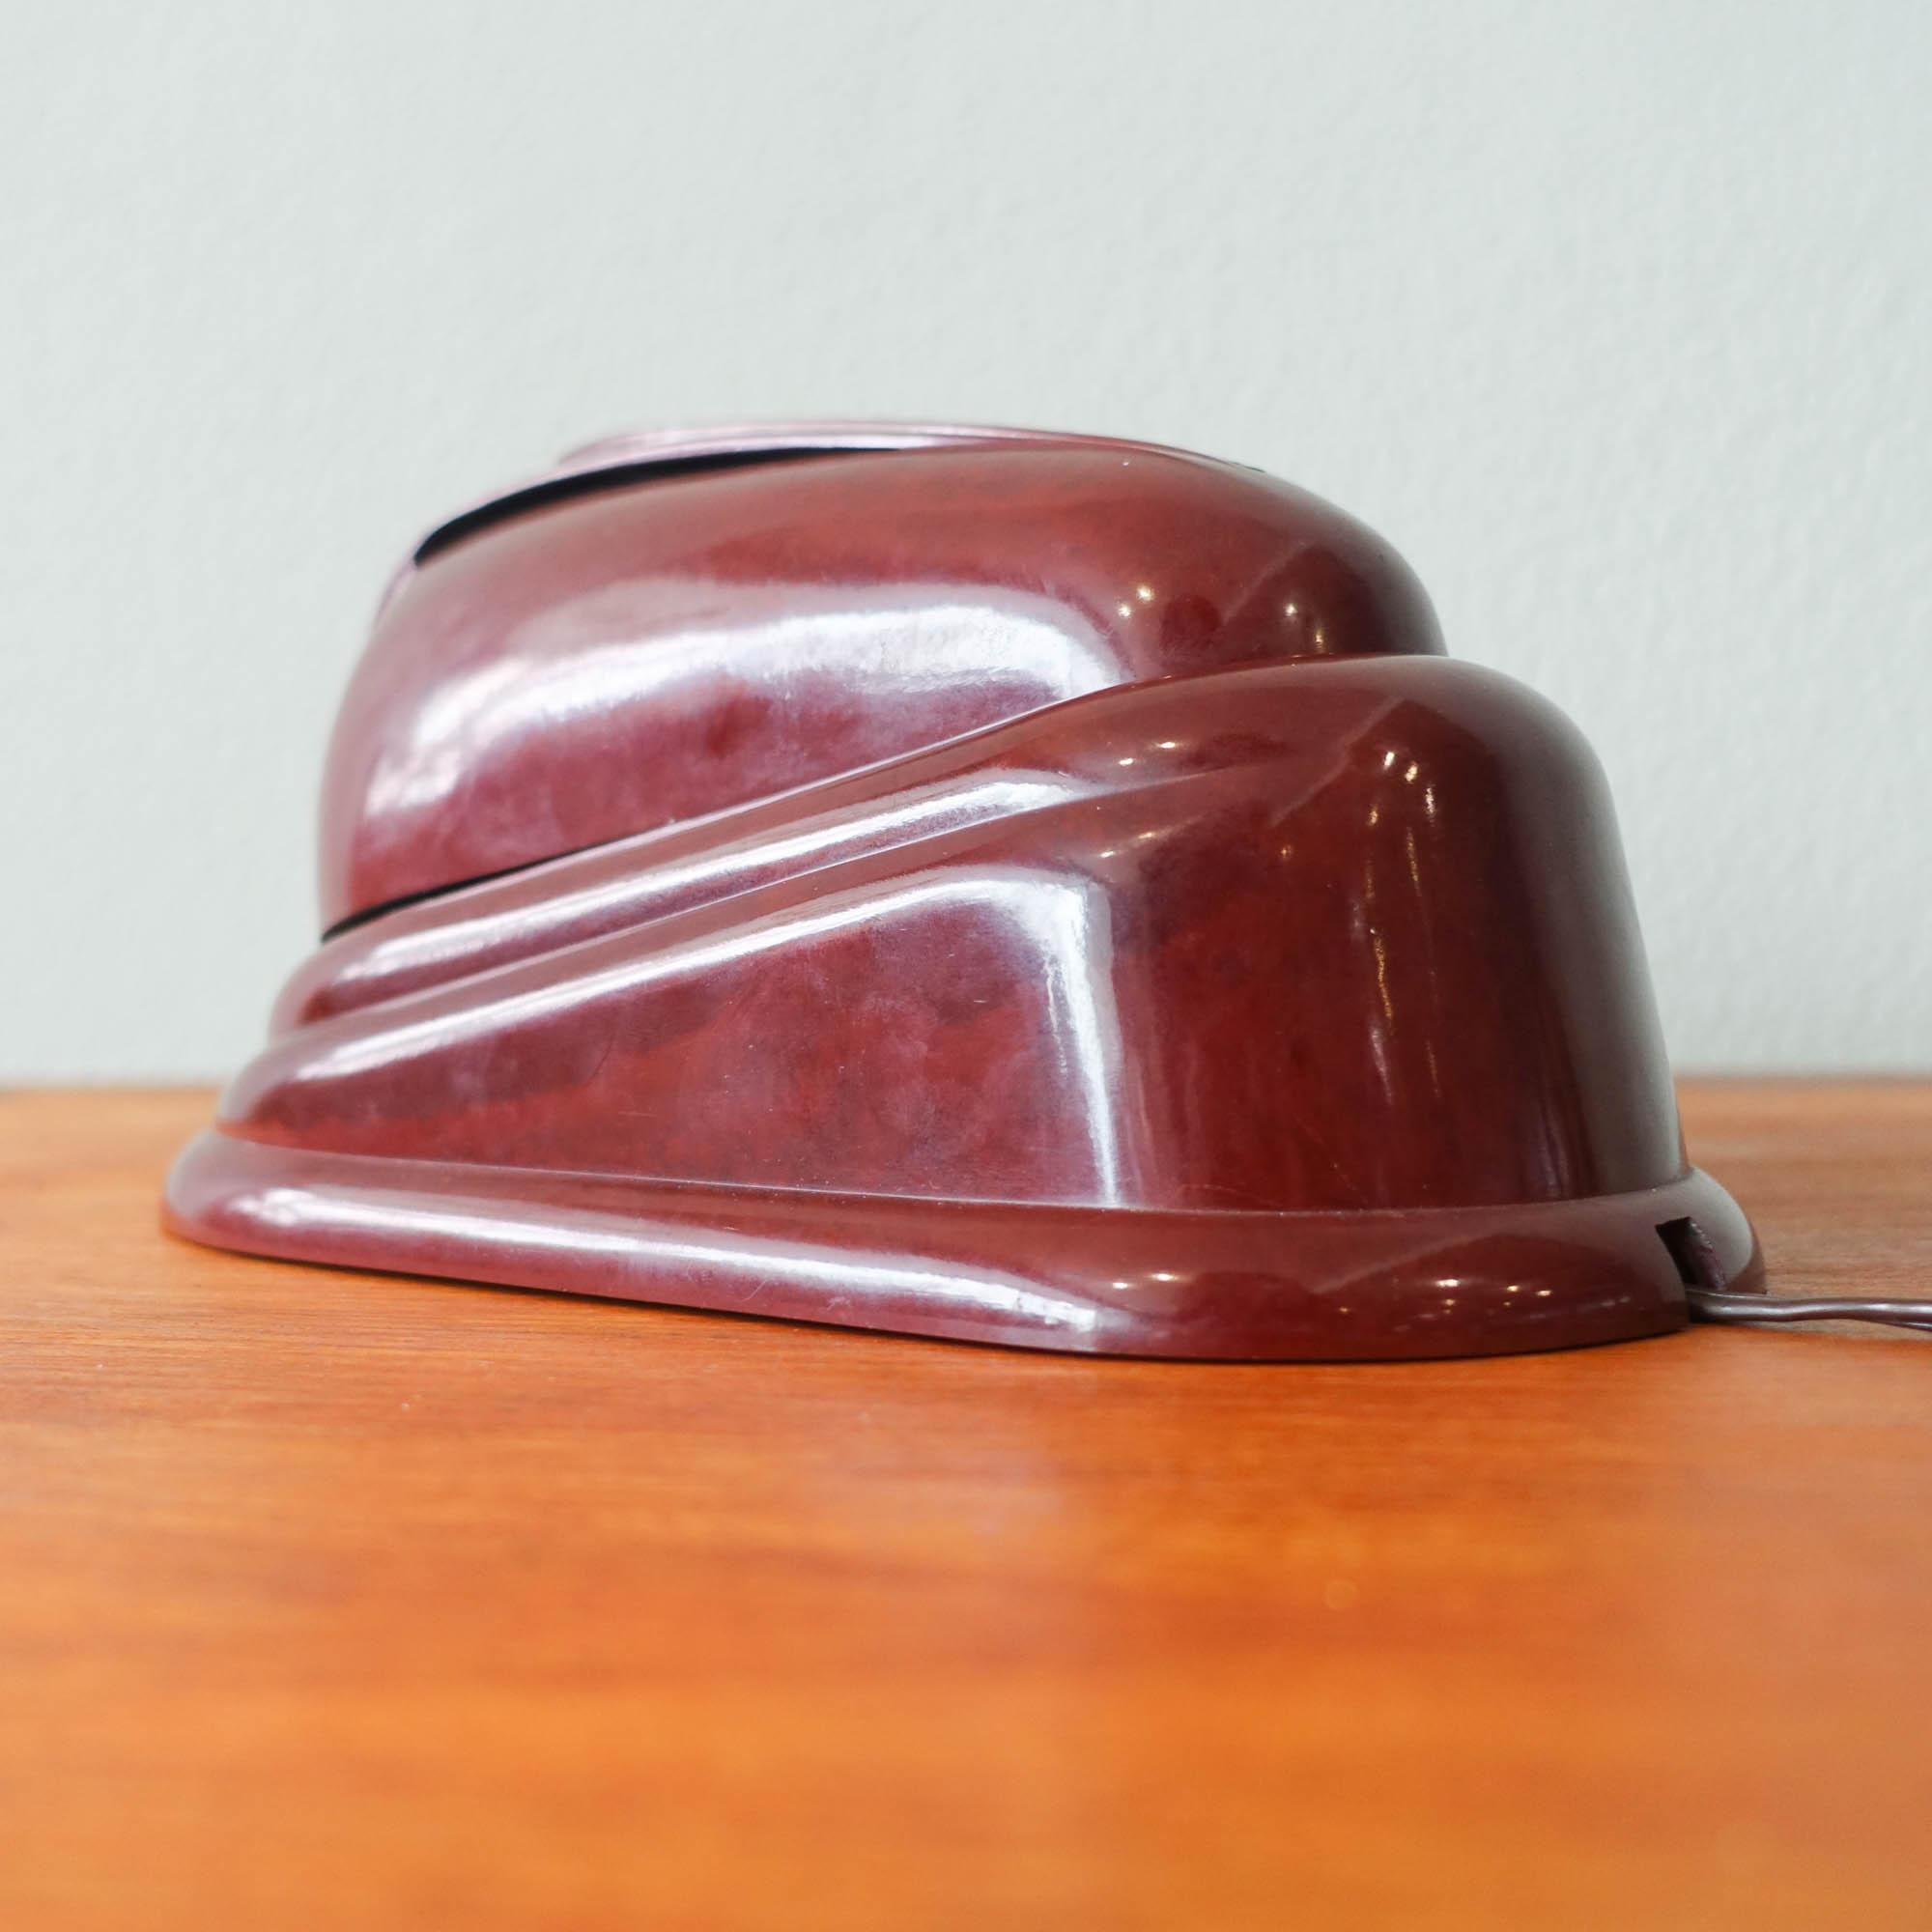 Model Bolide Table Lamp by Jumo Brevete for Jumo, 1940s For Sale 7